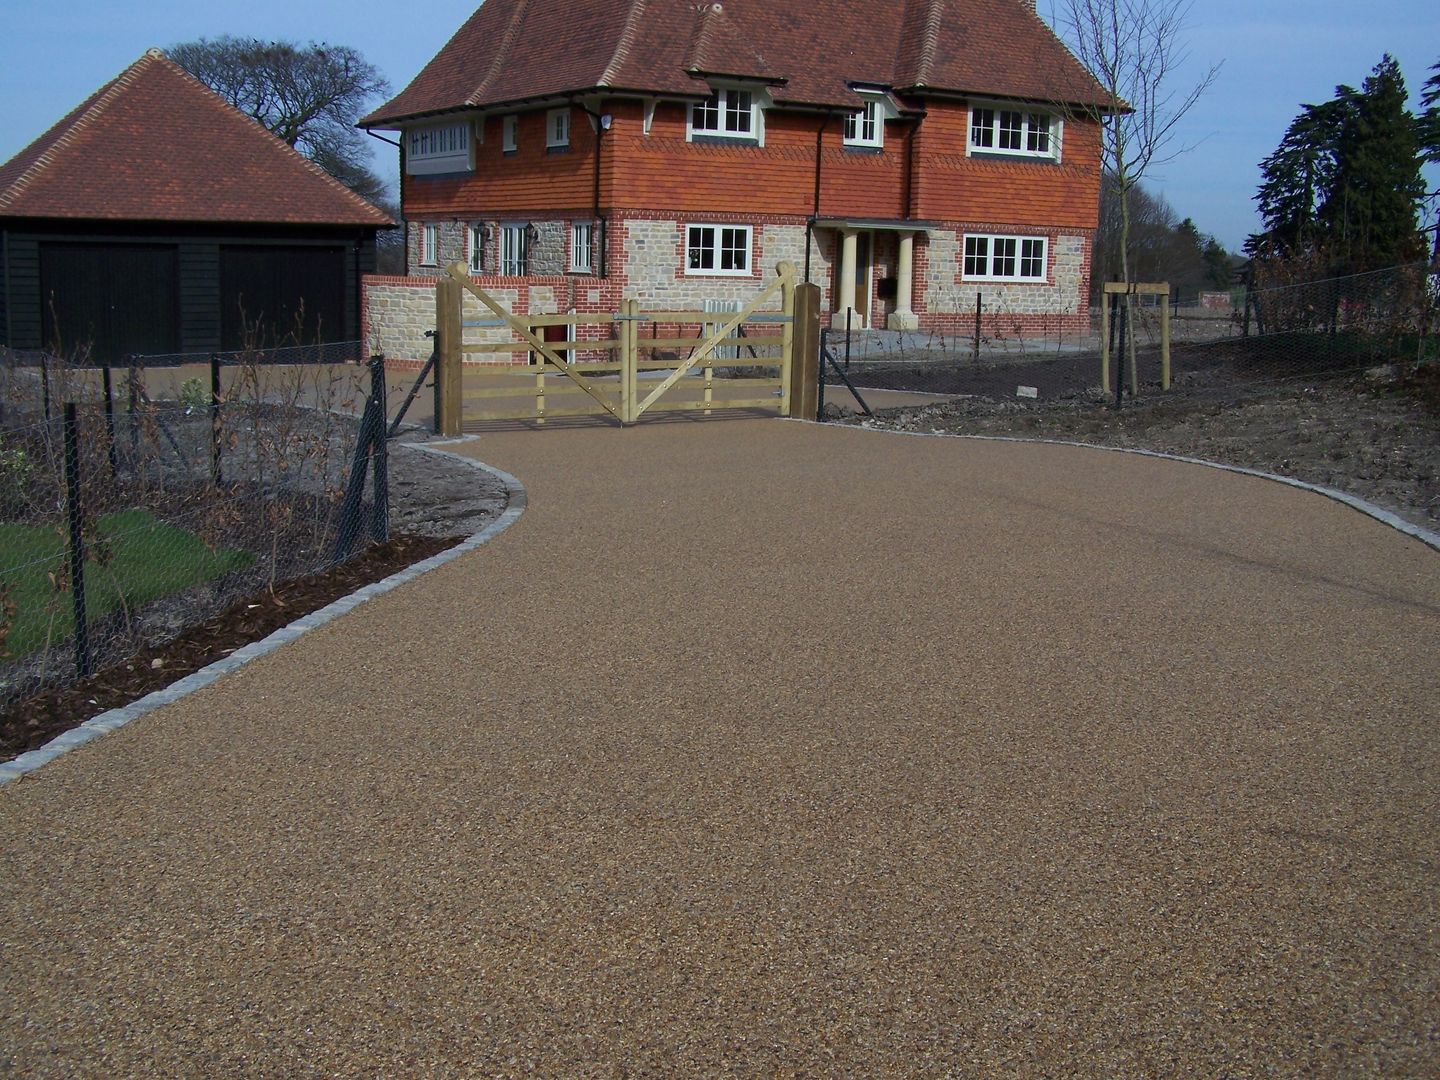 Domestic Driveways installation of resin bound paving, Permeable Paving Solutions UK Permeable Paving Solutions UK جدران